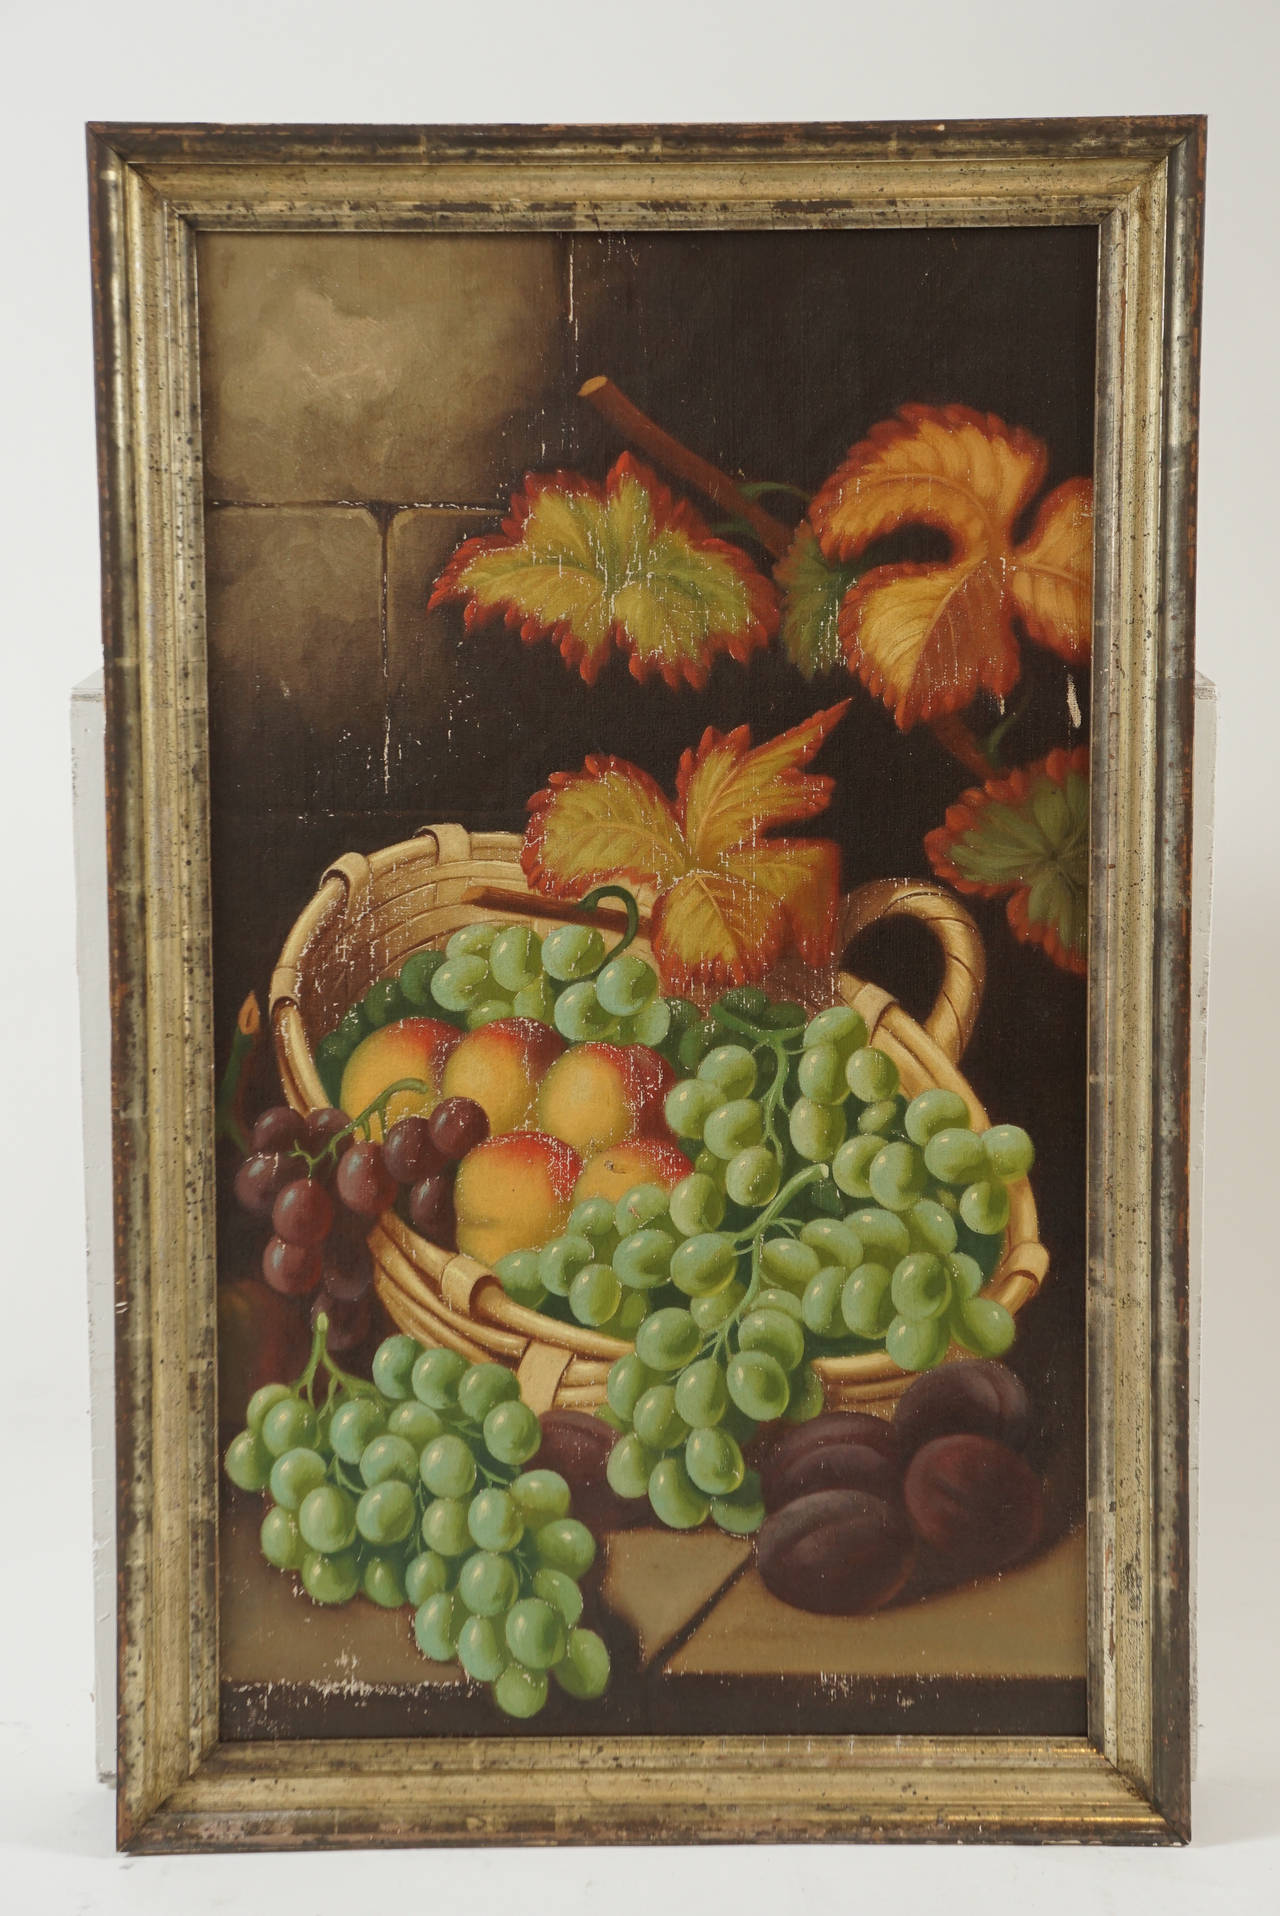 Beautifully Composed Still Life with Grapes, Peaches, Plumsand Autumal Leaves
American 19th Century. Unsigned
Width of Frame 1.5 inches